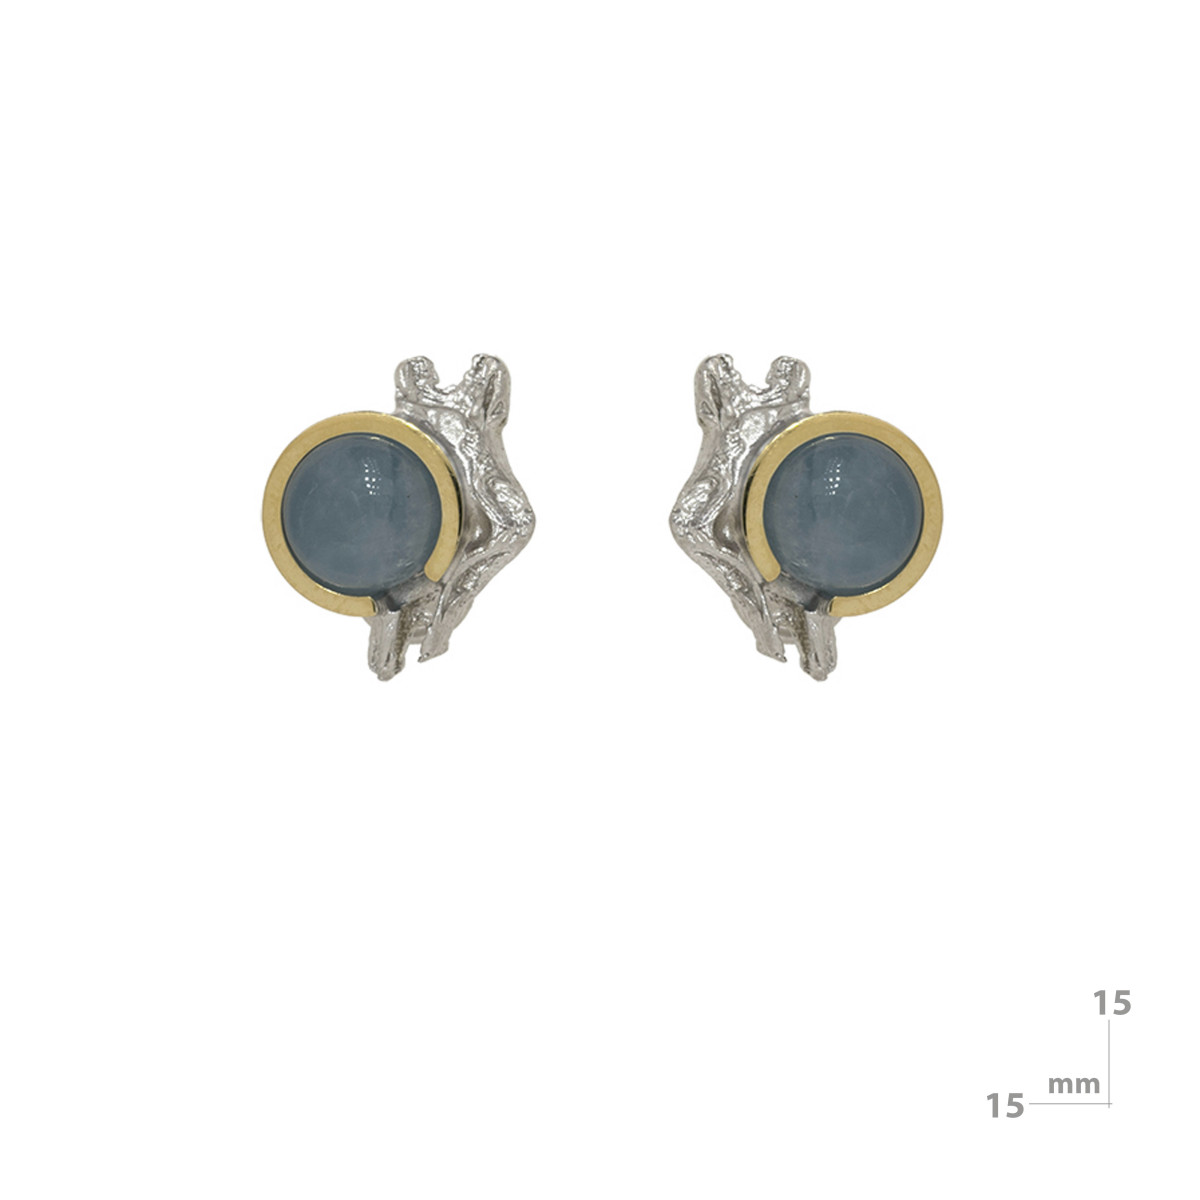 Silver, gold and aquamarine earrings